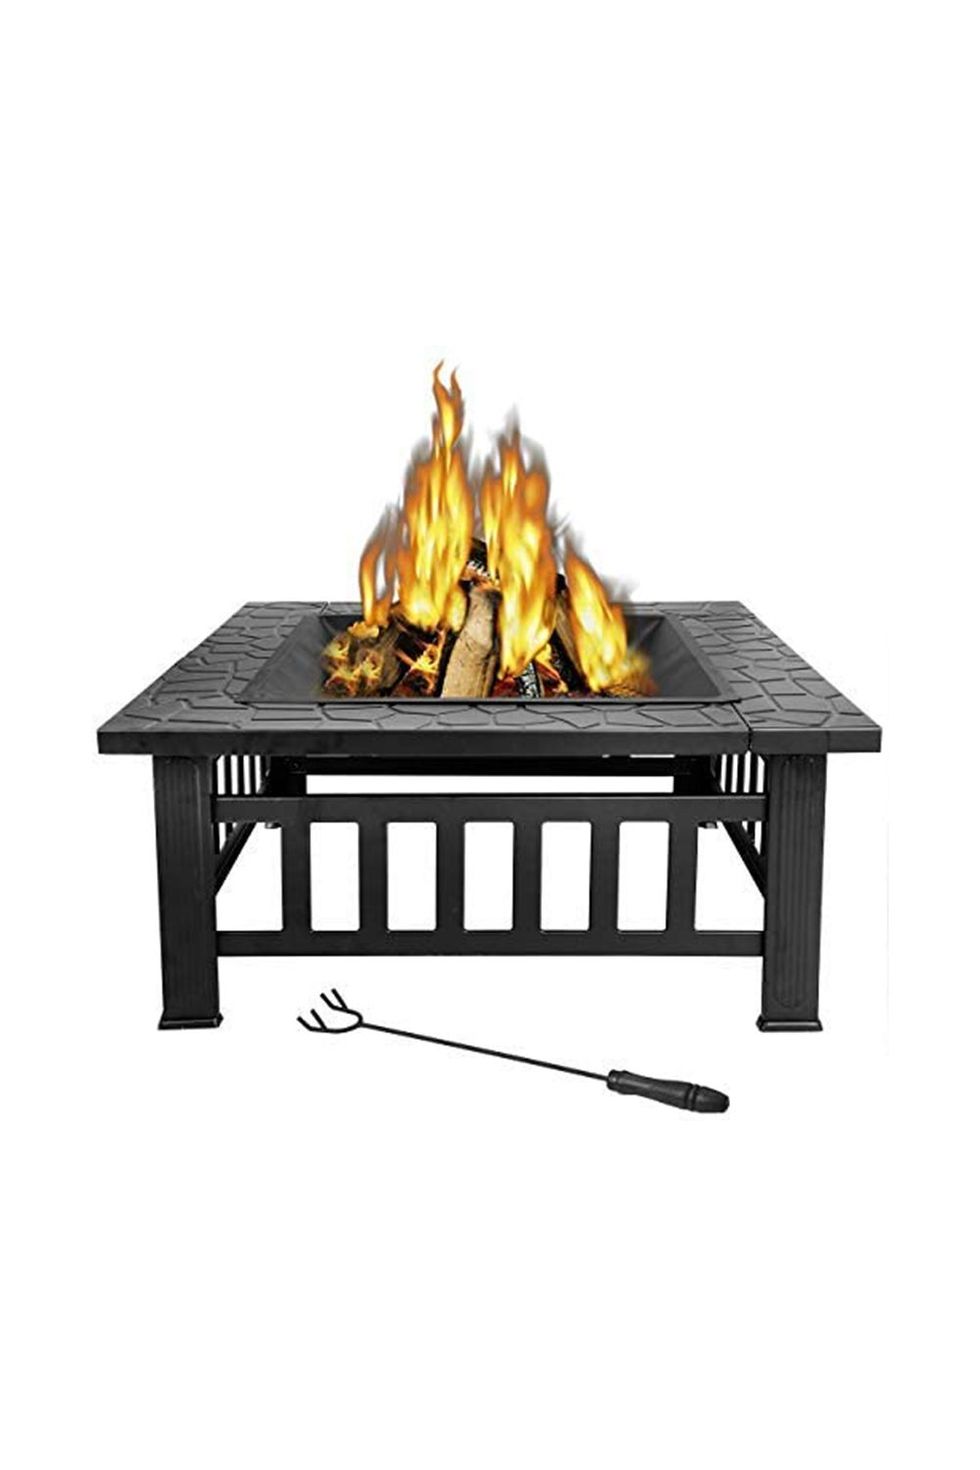 32-inch Outdoor Square Metal Fire Pit